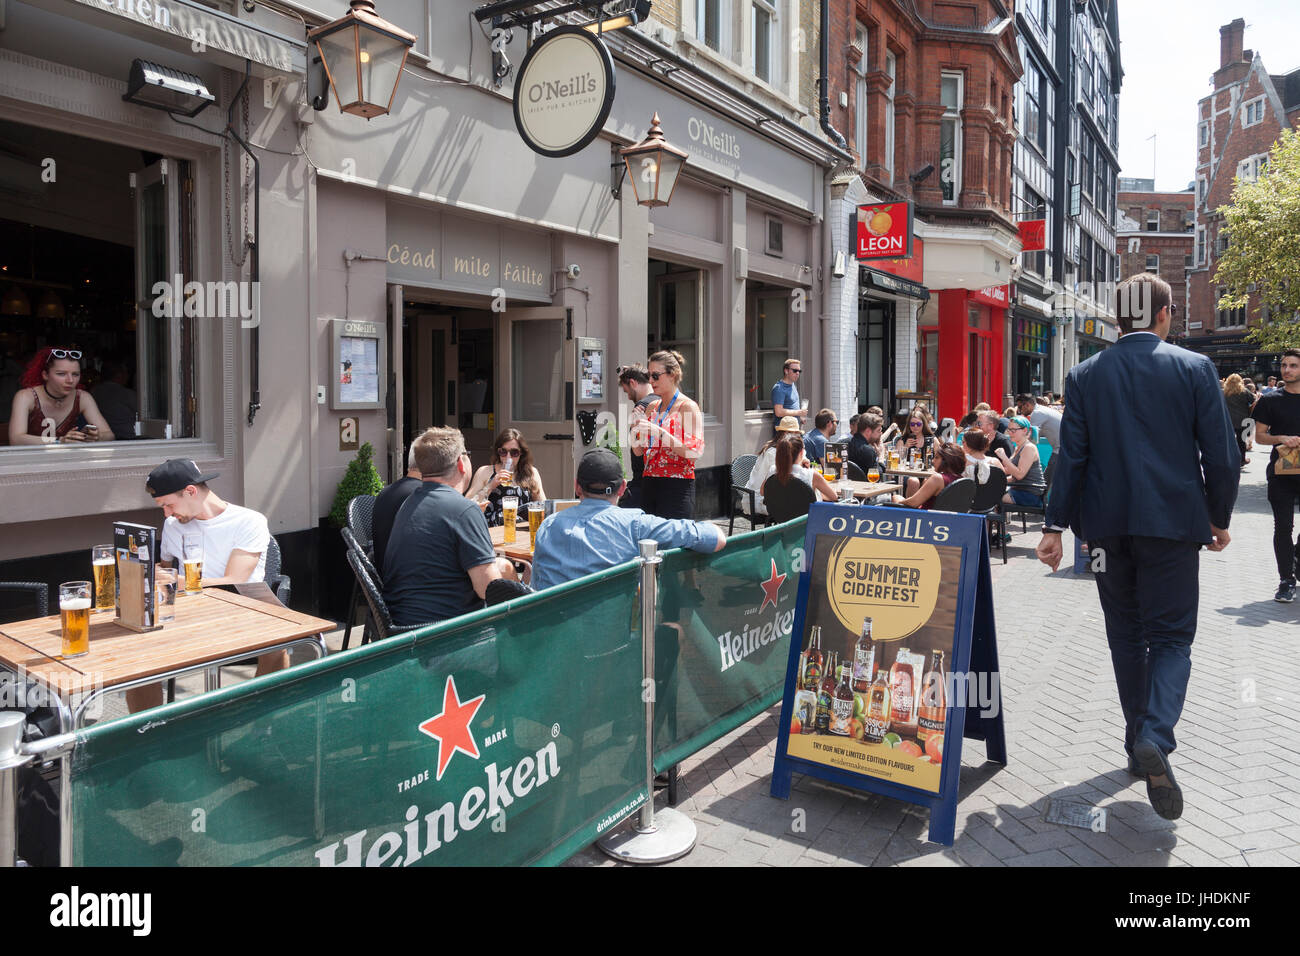 The north end of Carnaby Street, London. O'Neill's Irish Pub with customers drinking outside, Leon naturally fast food, Ben's Cookies, EE telecommunic Stock Photo